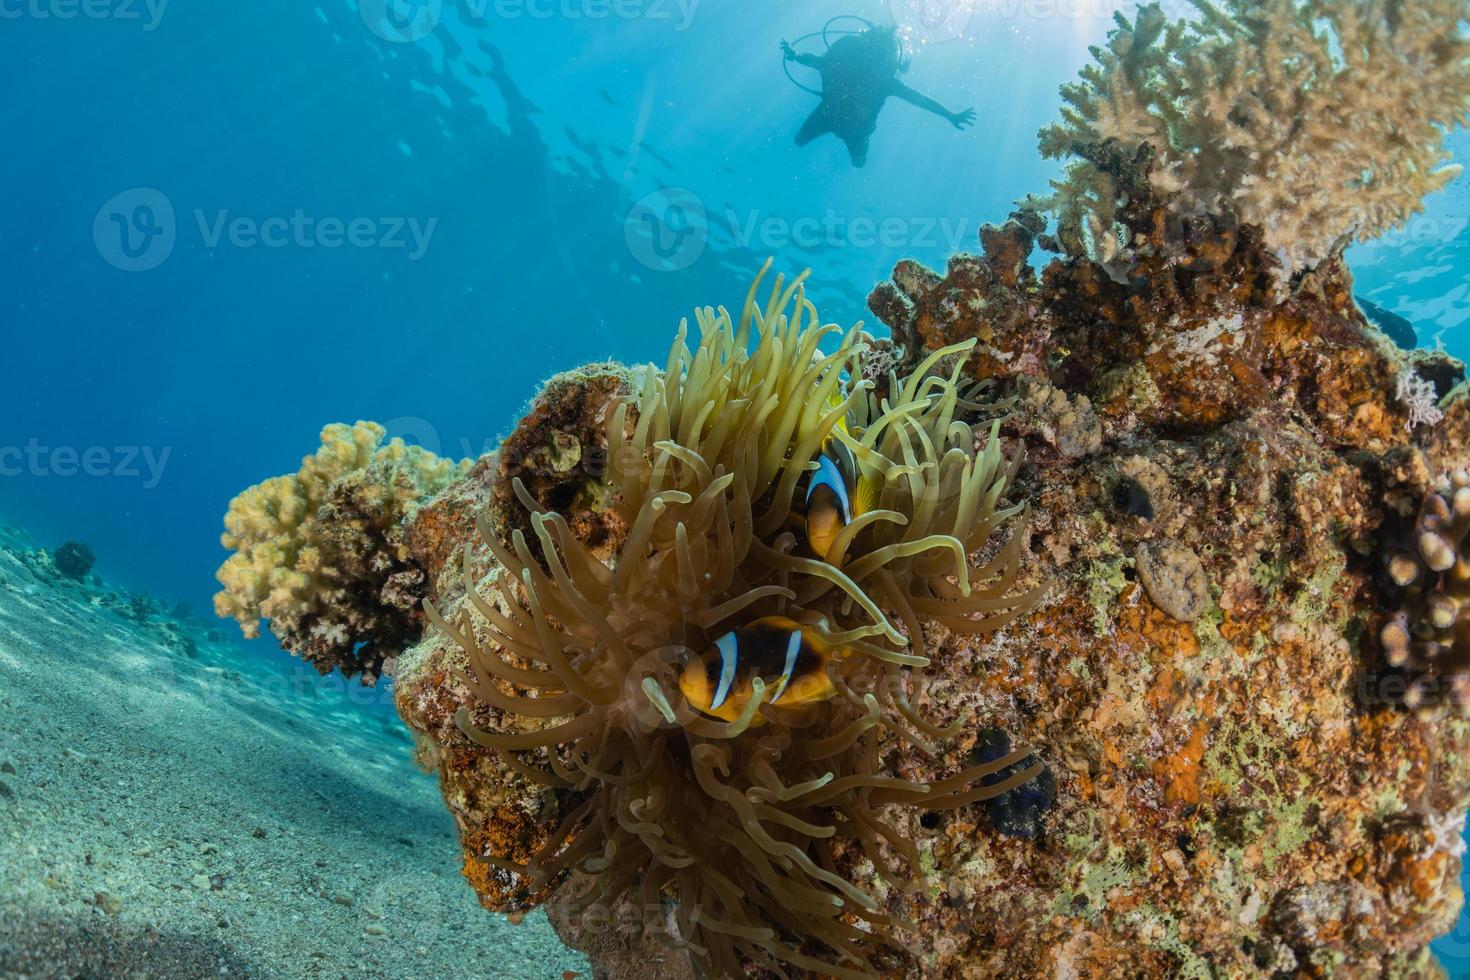 Coral reef and water plants in the Red Sea, Eilat Israel photo